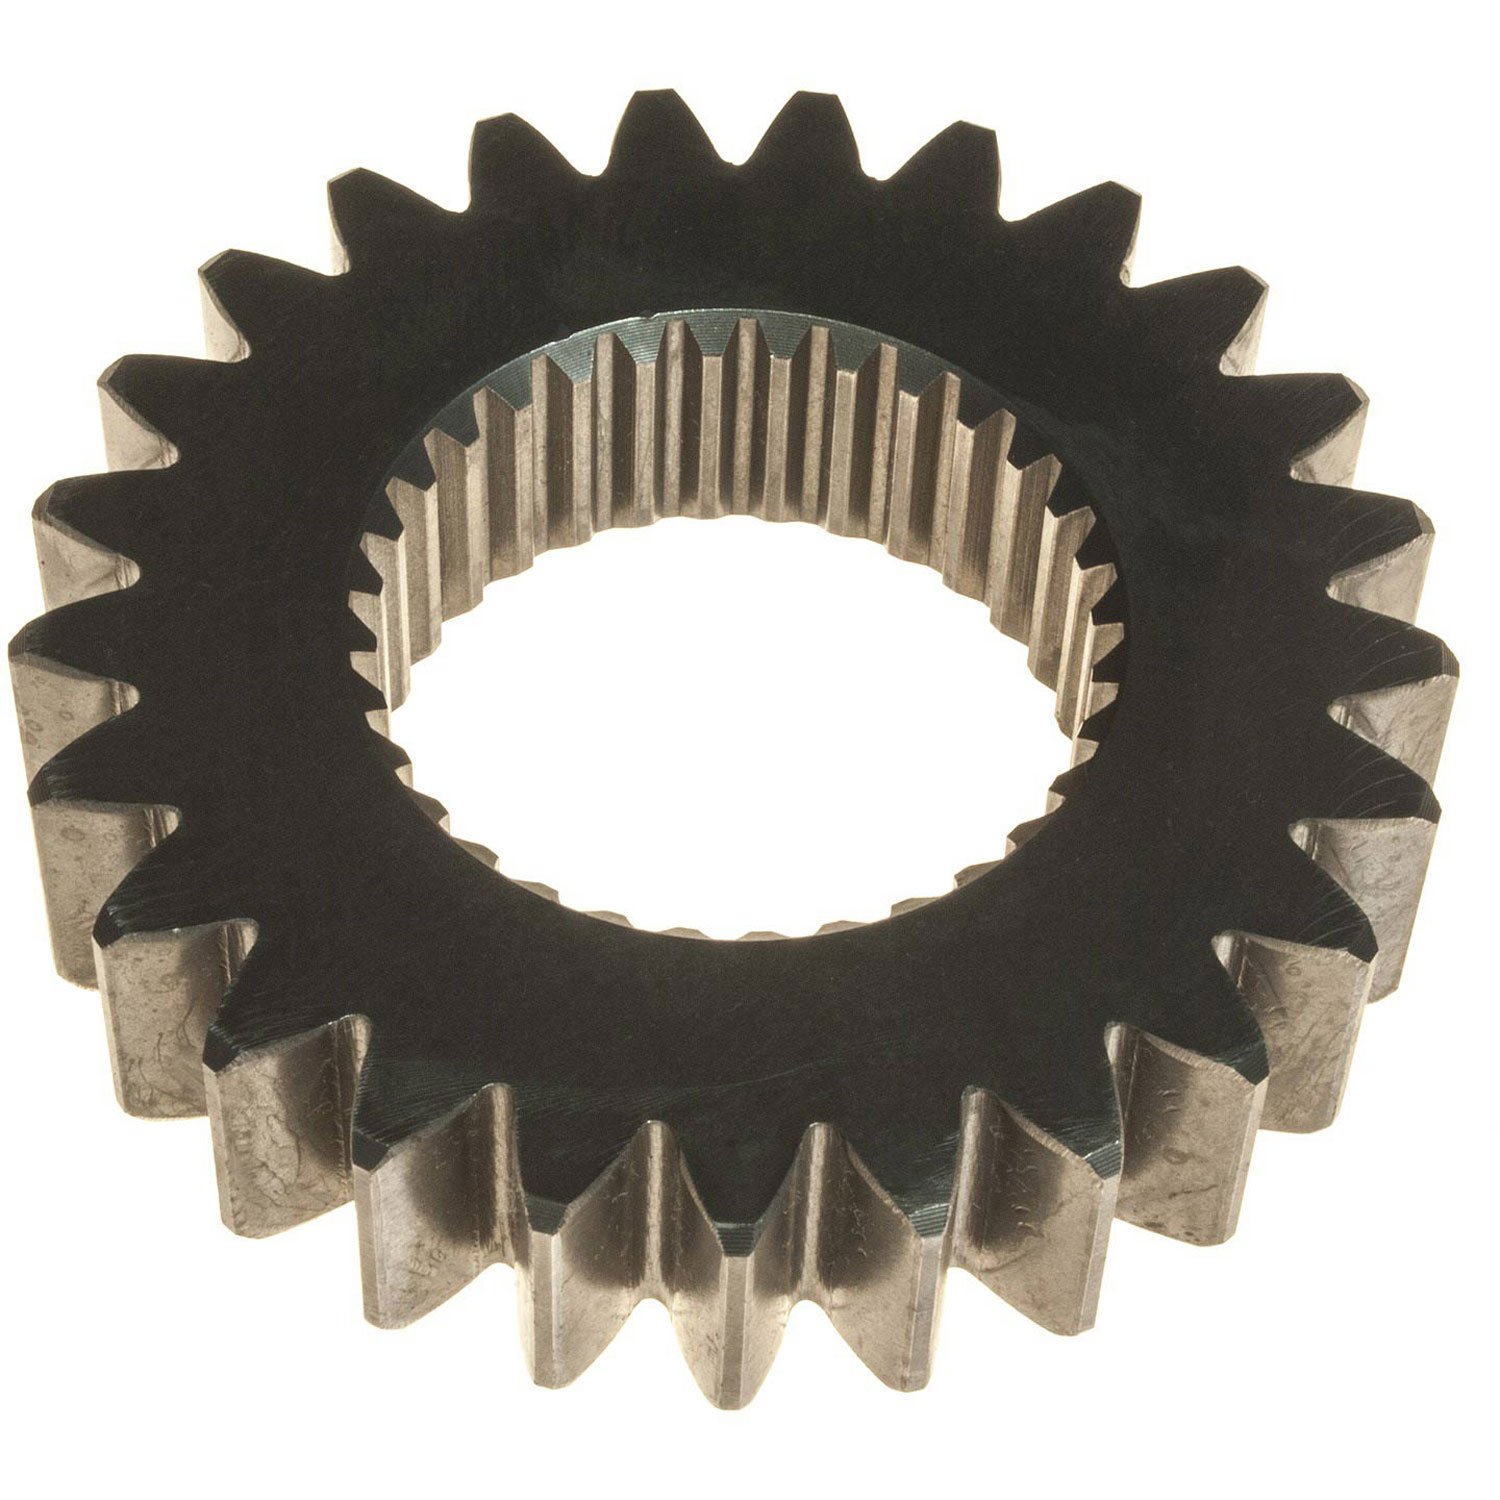 1st Gear Cluster For Super T-10 Plus 2-Speed